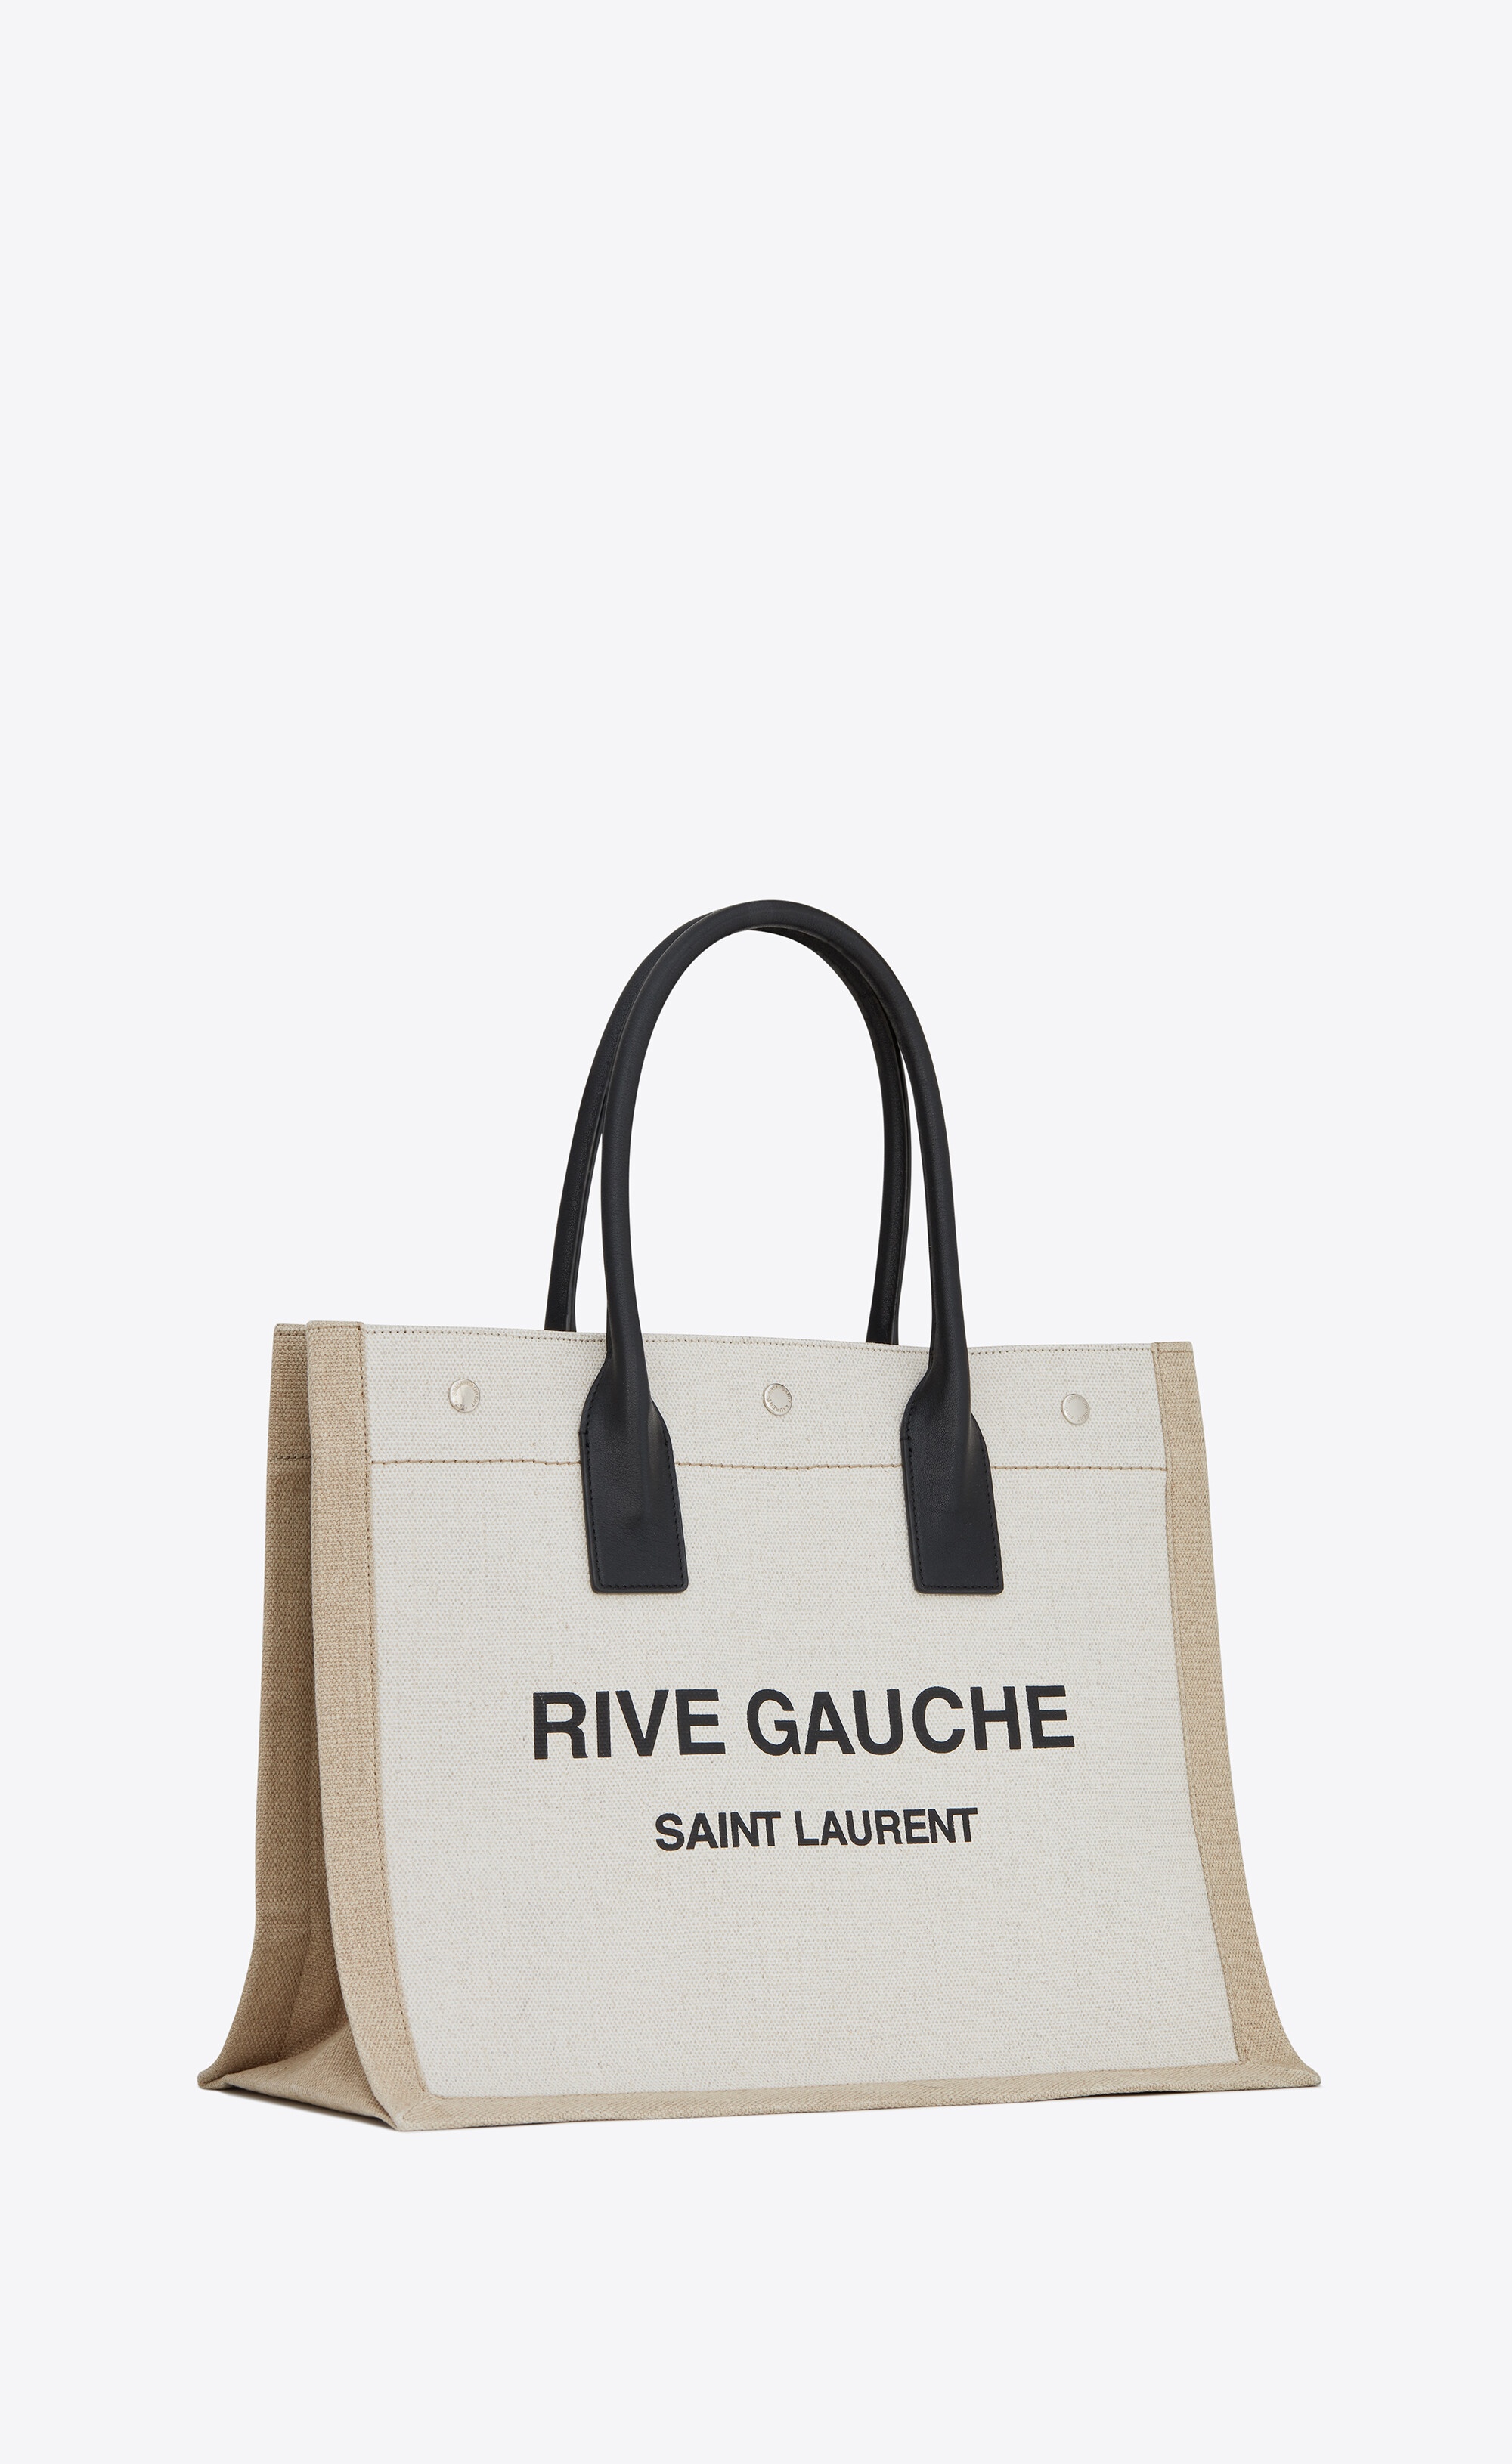 rive gauche small tote bag in linen and leather - 5